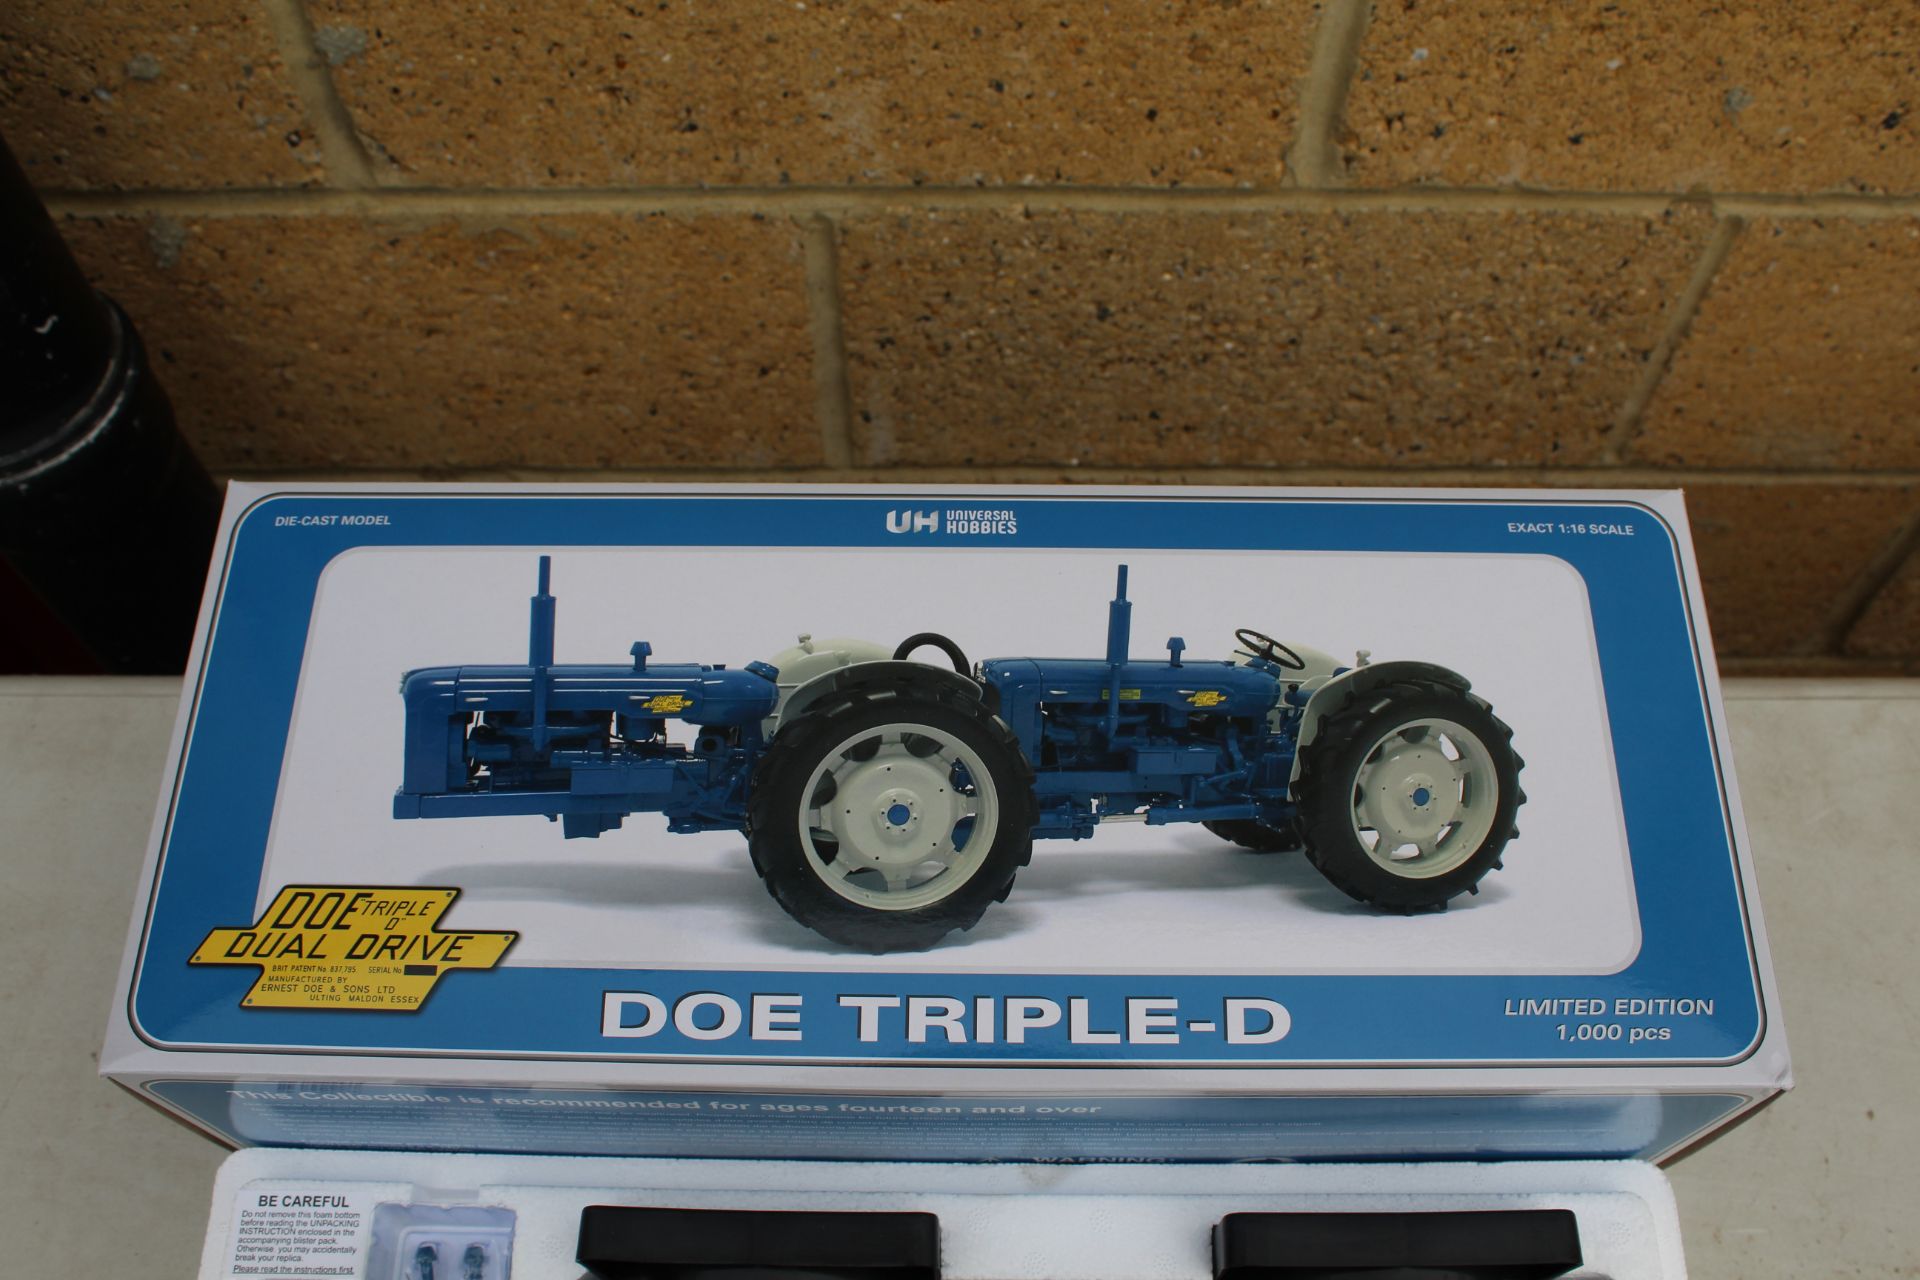 UH Doe Triple D Tractor - Limited Edition 1/16. V - Image 4 of 4